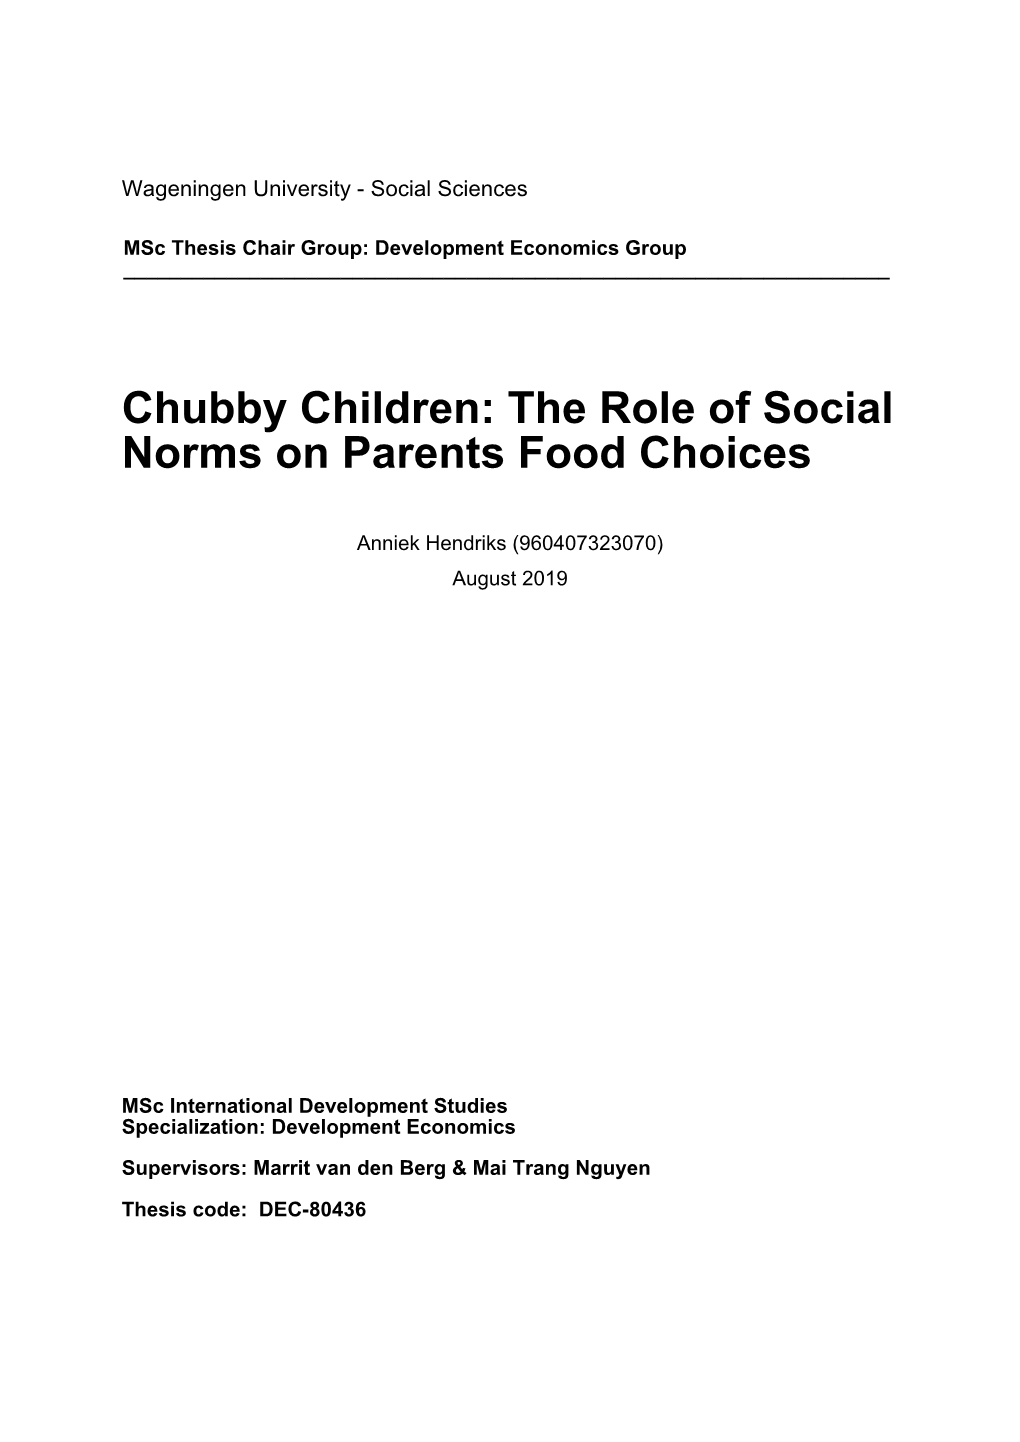 Chubby Children: the Role of Social Norms on Parents Food Choices